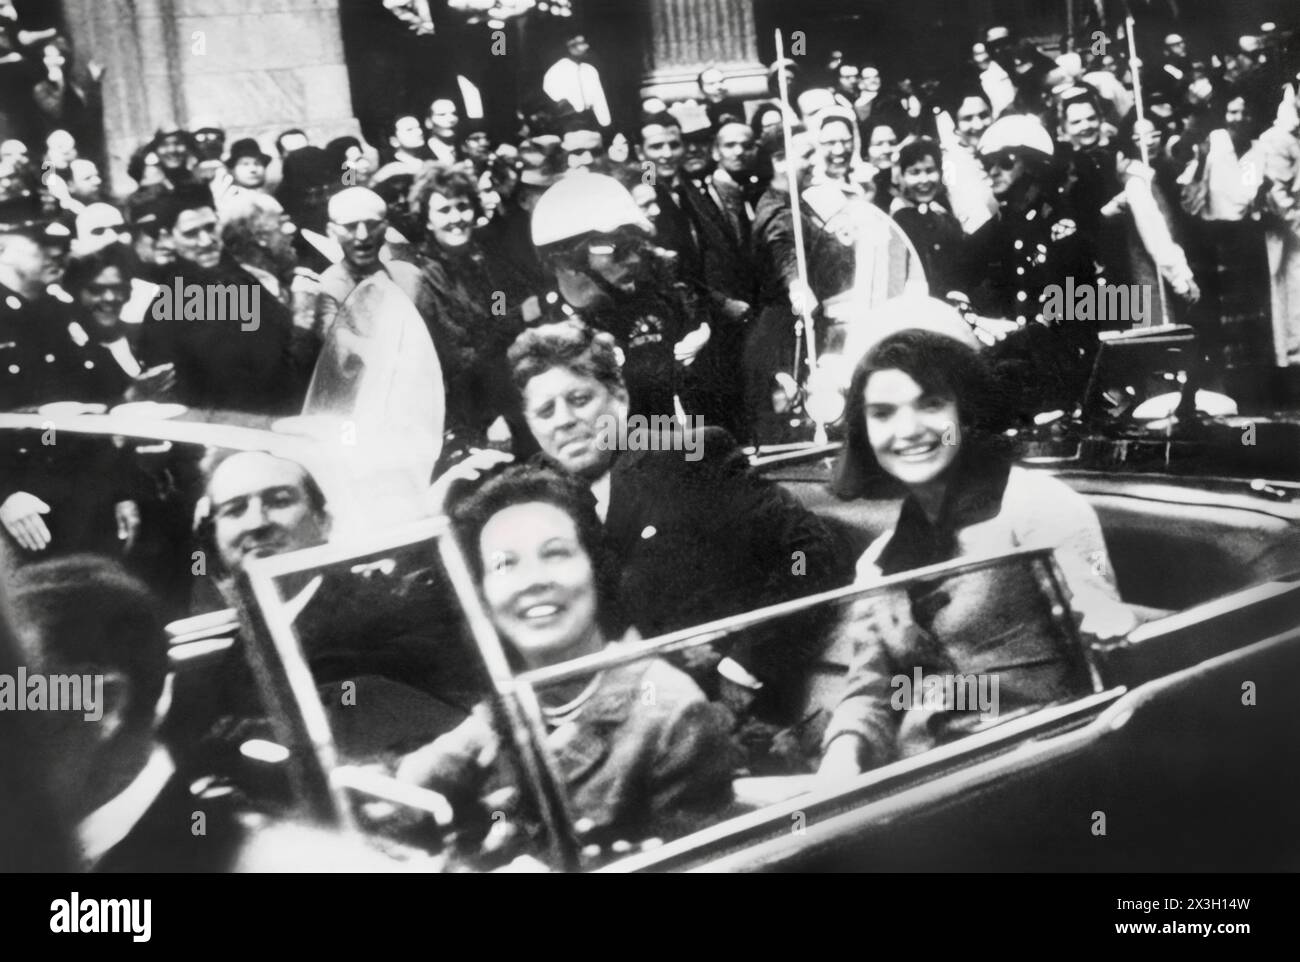 President John F. Kennedy and Jaqueline Kennedy with Texas Governor John Connally and wife in downtown Dallas motorcade on November 22, 1963 prior to President Kennedy's assassination. (USA) Stock Photo